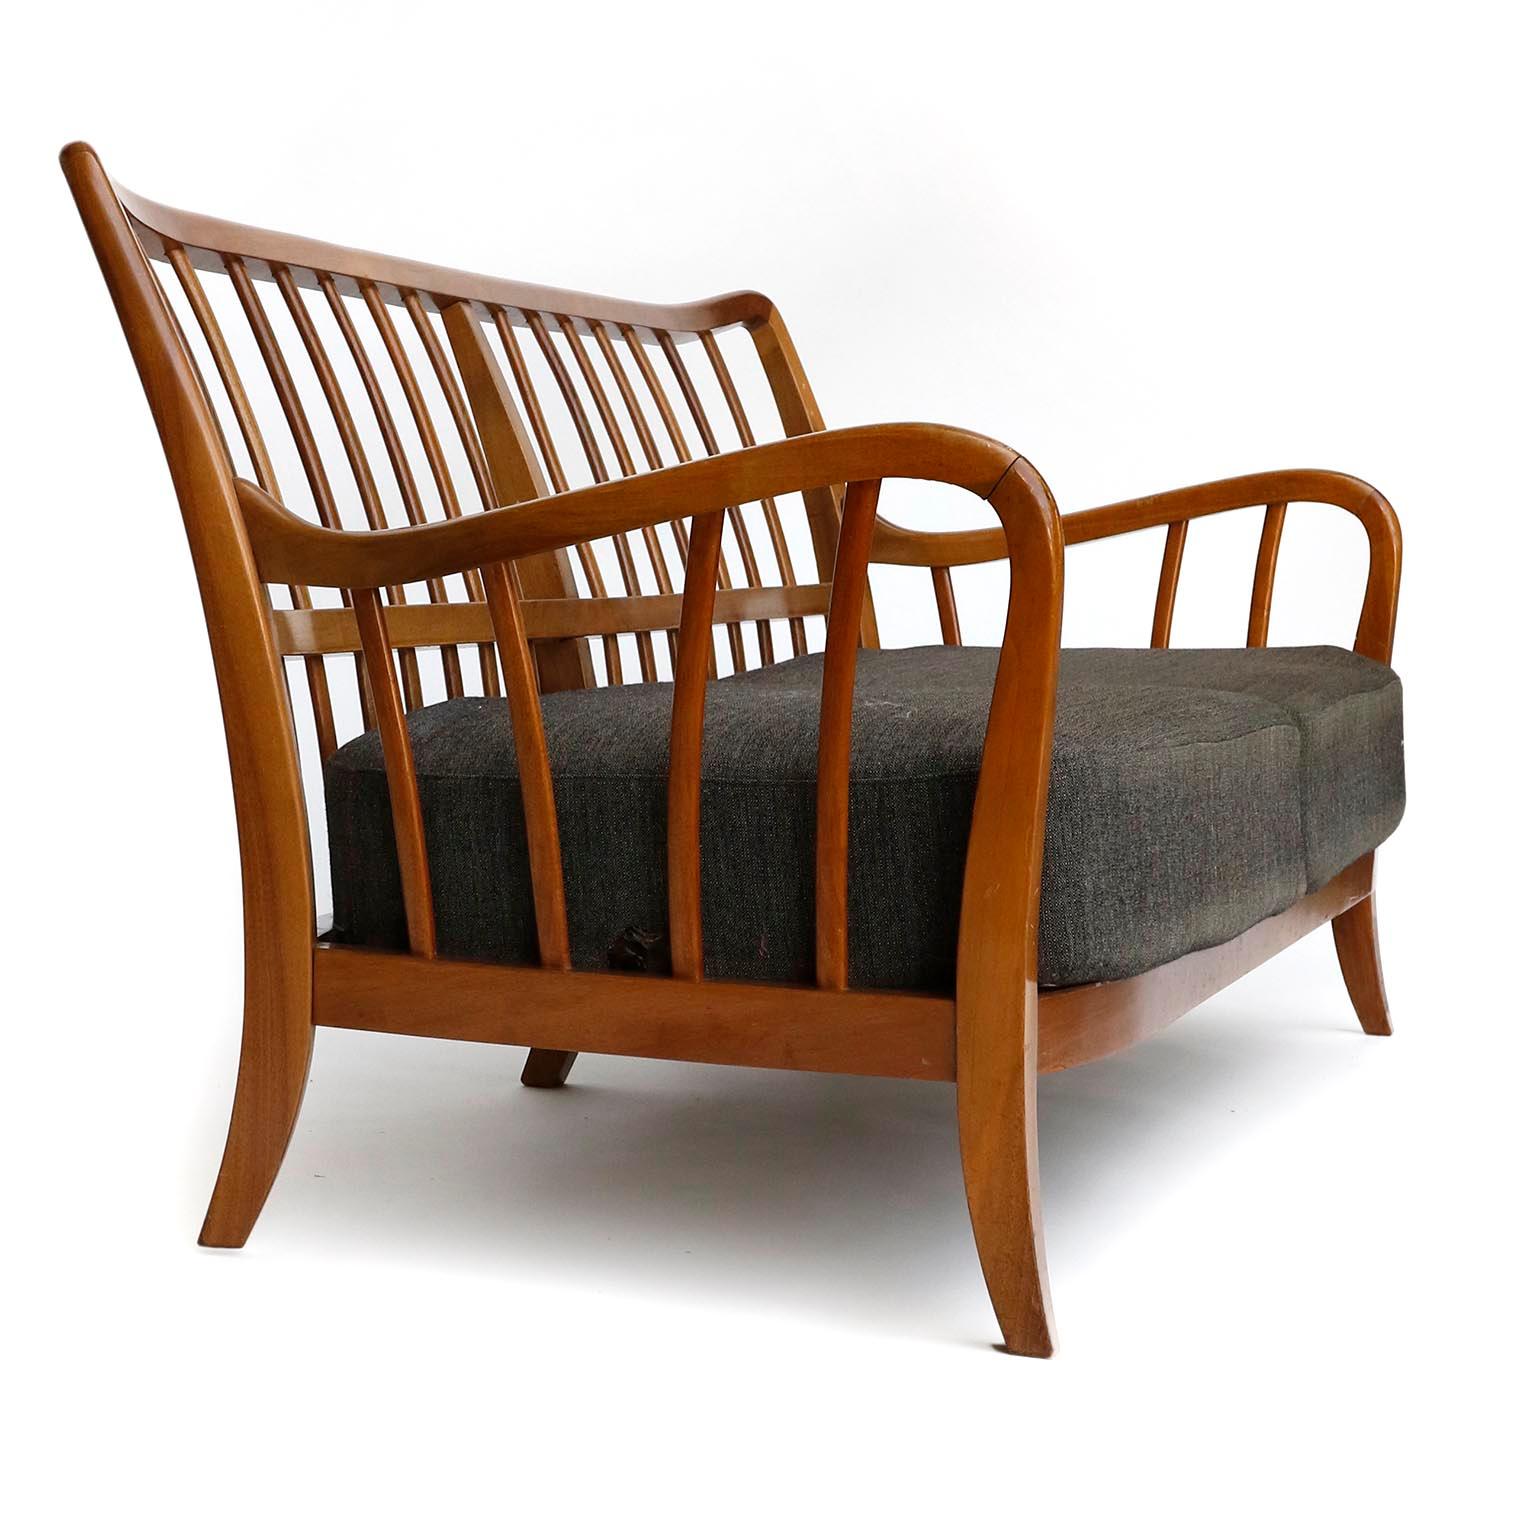 Seette Bench Seat Attributed to Josef Frank, Walnut Wood, Thonet, 1940 1